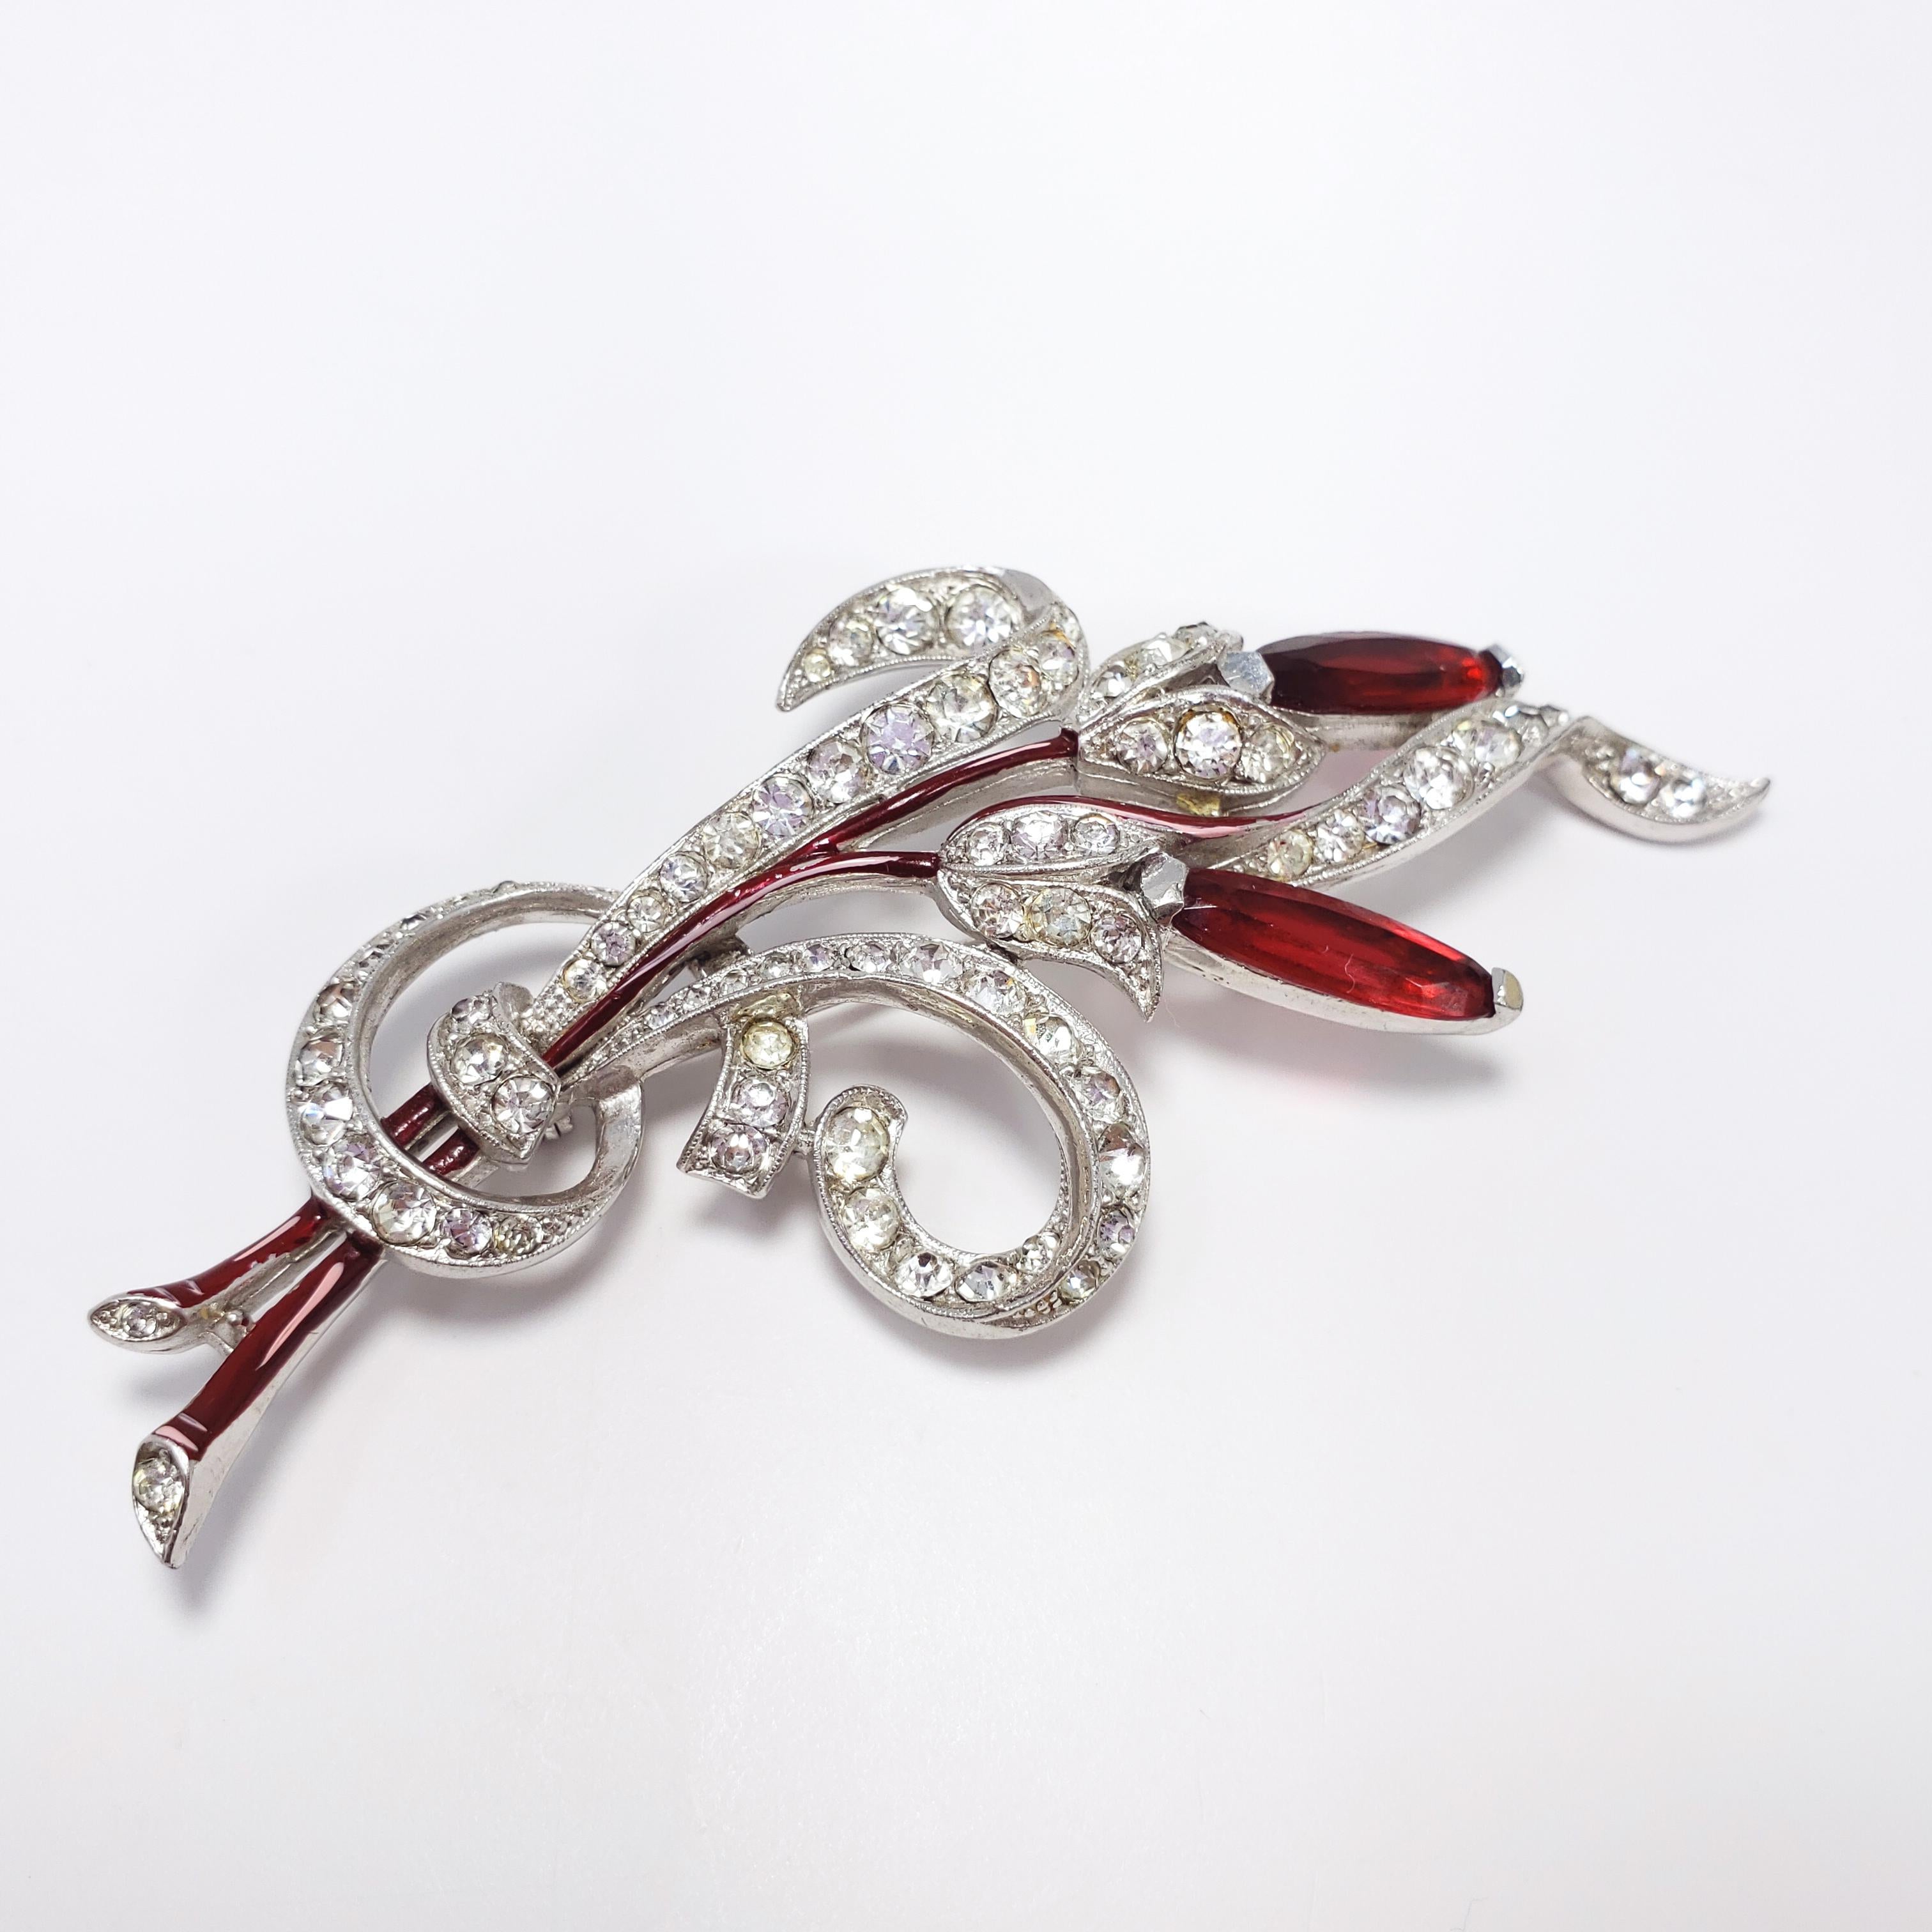 A vintage brooch from Trifari, designed by Alfred Philippe during the mid 1950s. Features rhodium plated setting, with prong set ruby-red navette crystals and bezel set clear chatons. Accented with red and pink enamel. An excellent addition for your